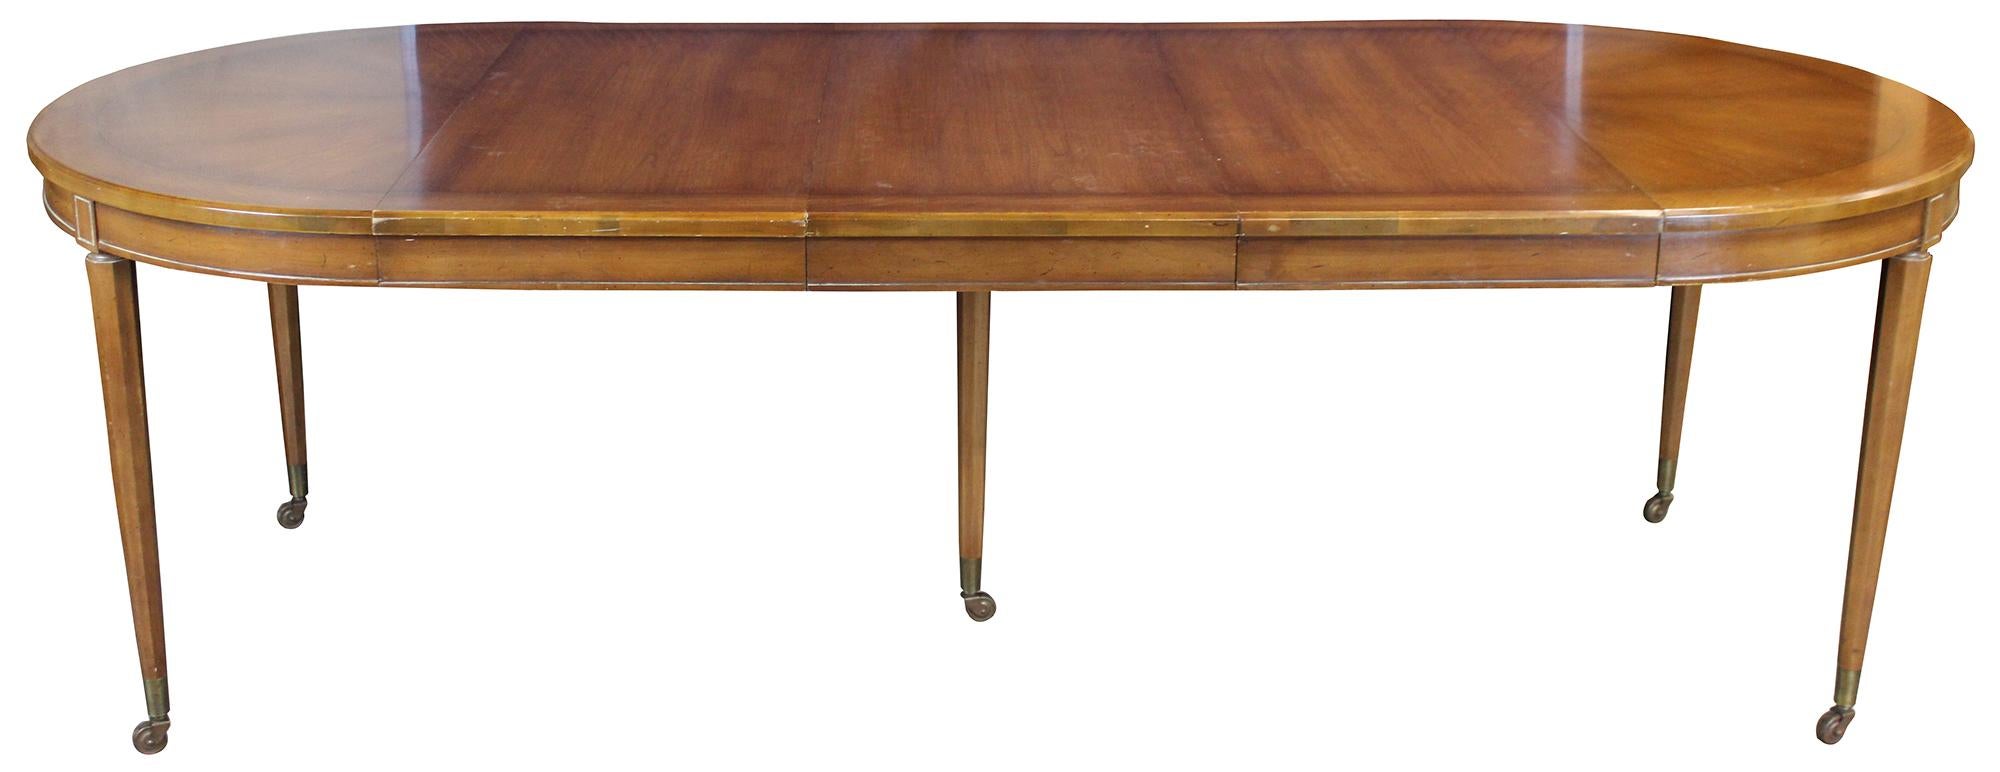 Italian Provincial dining table by Union National of Jamestown New York, circa 1950s. A round extendable table made from fruitwood with Parma finish. Features octagonal tapered legs leading to casters.

Measures: 96